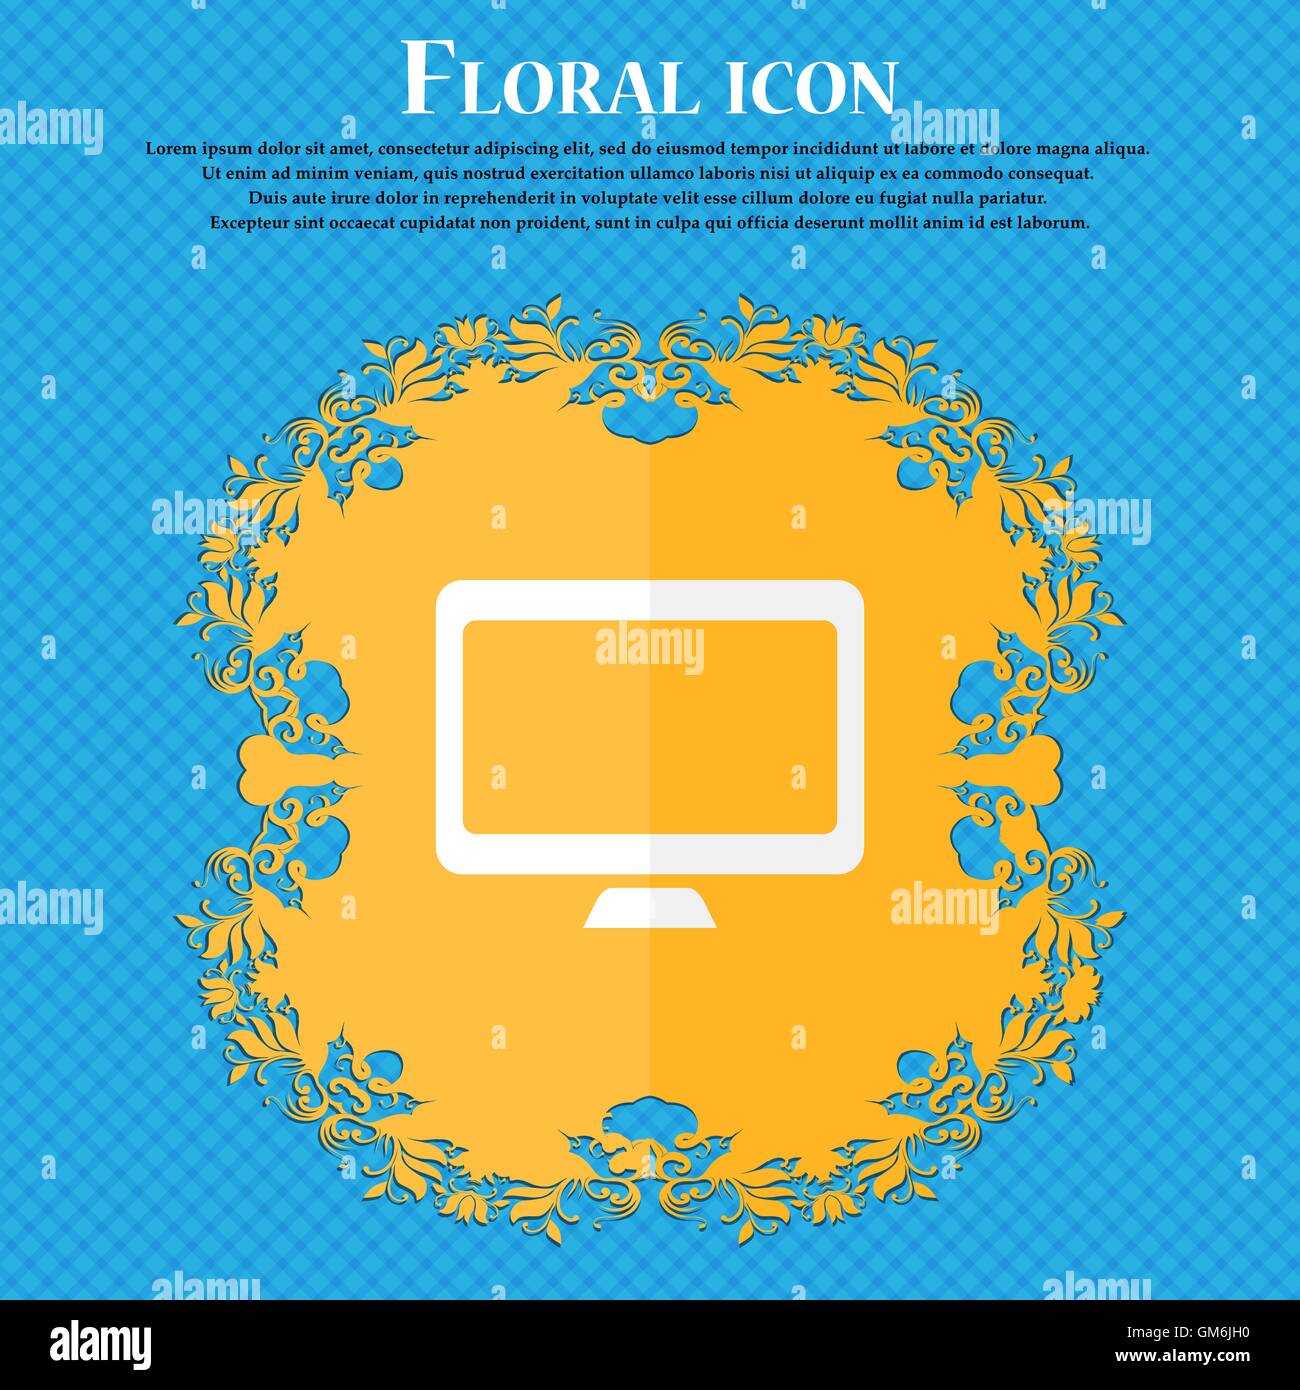 Computer widescreen monitor Floral flat design on a blue